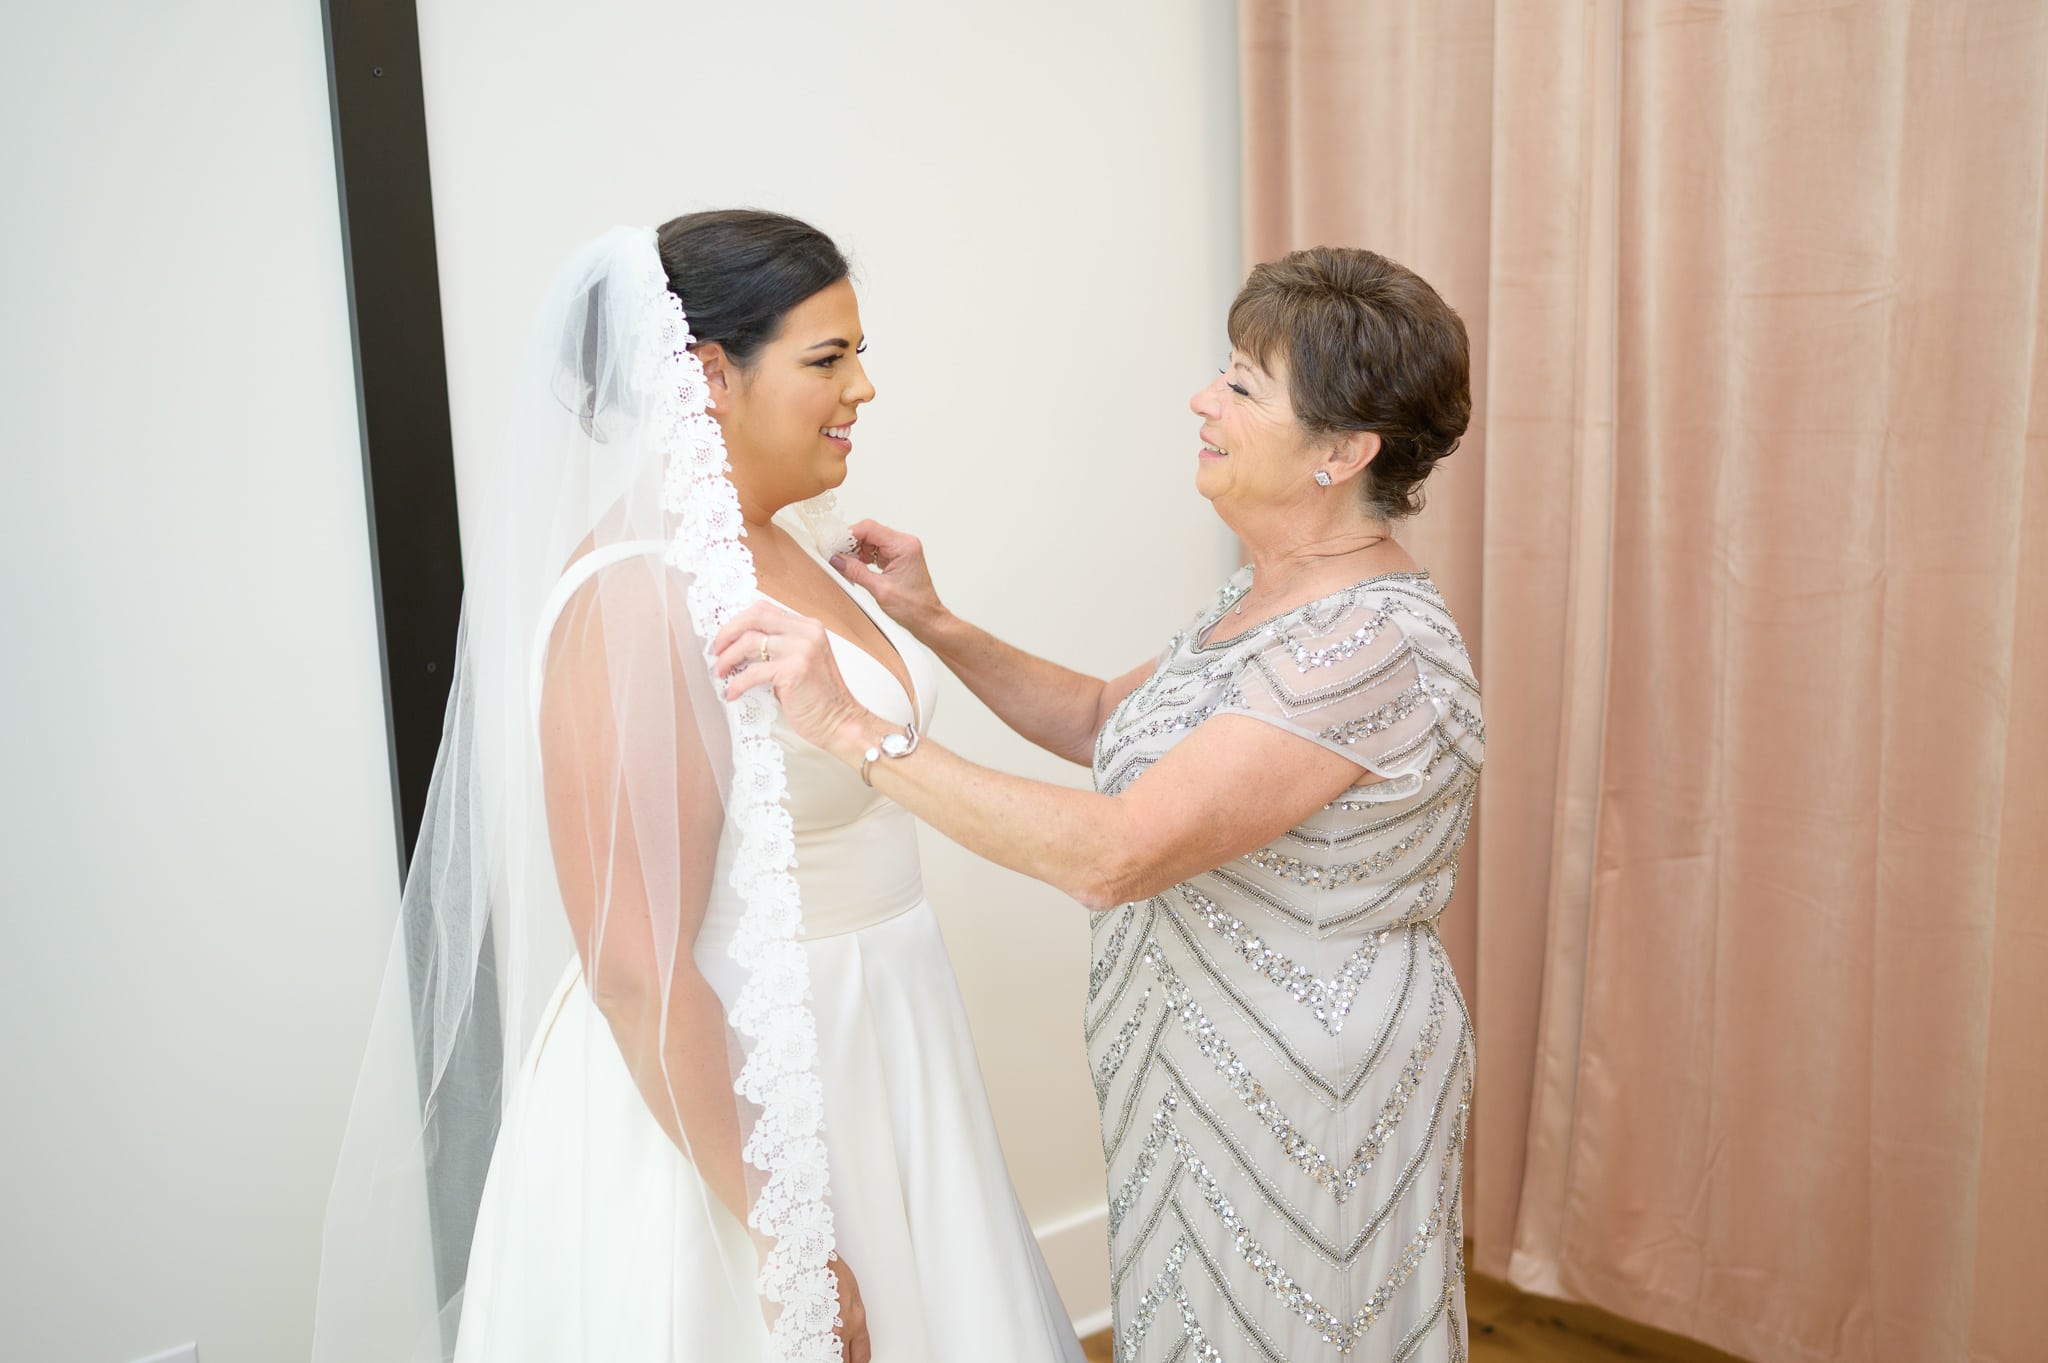 Mom helping bride with veil - The Venue at White Oaks Farm